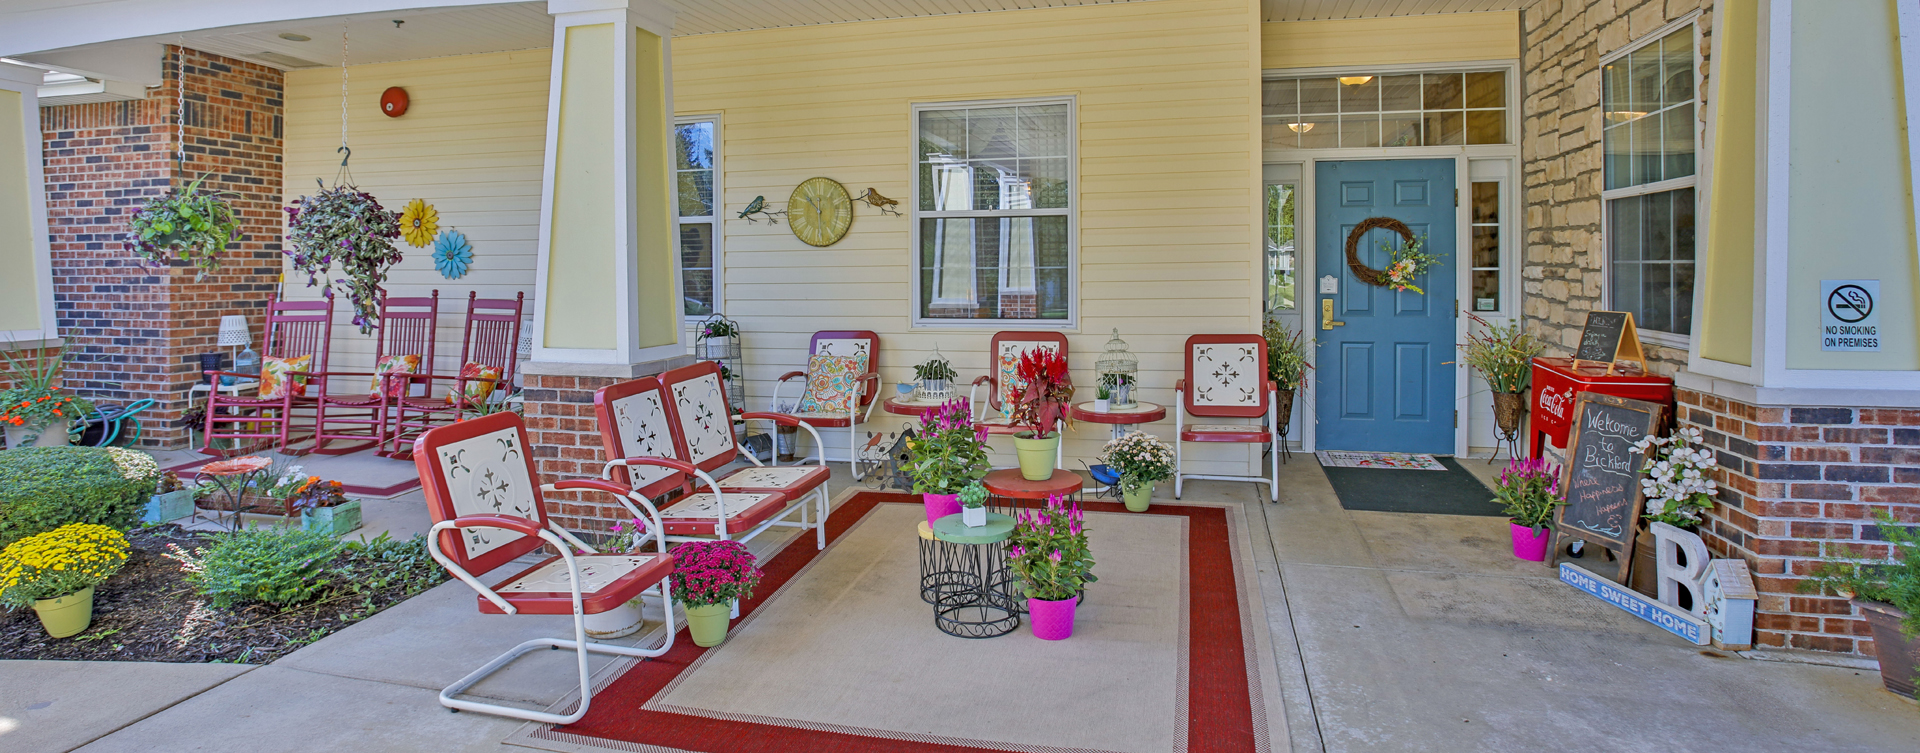 Relax in your favorite chair on the porch at Bickford of Crawfordsville